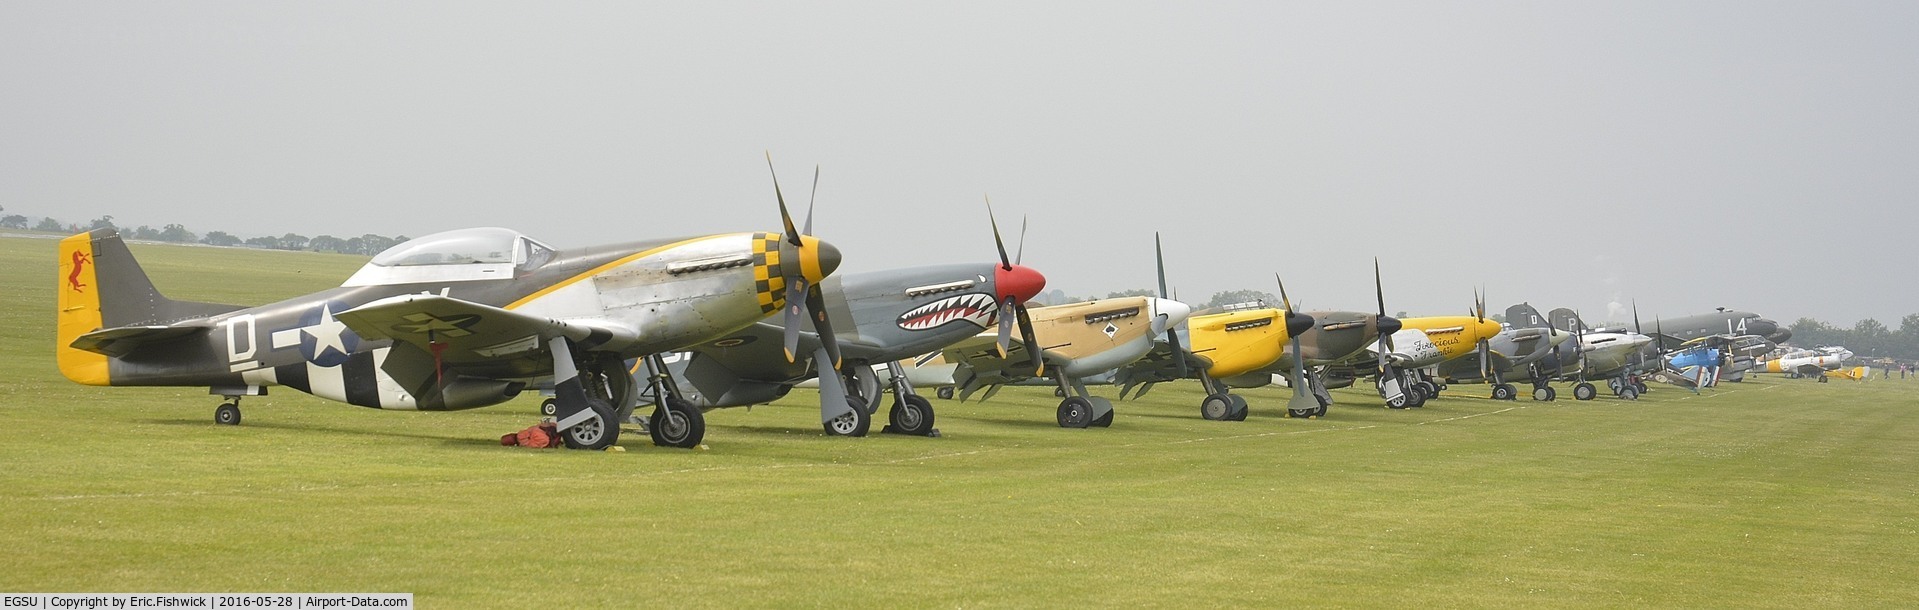 Duxford Airport, Cambridge, England United Kingdom (EGSU) - Part of the Flightline emerging from the morning mist at the IWM American Airshow, May 2016.